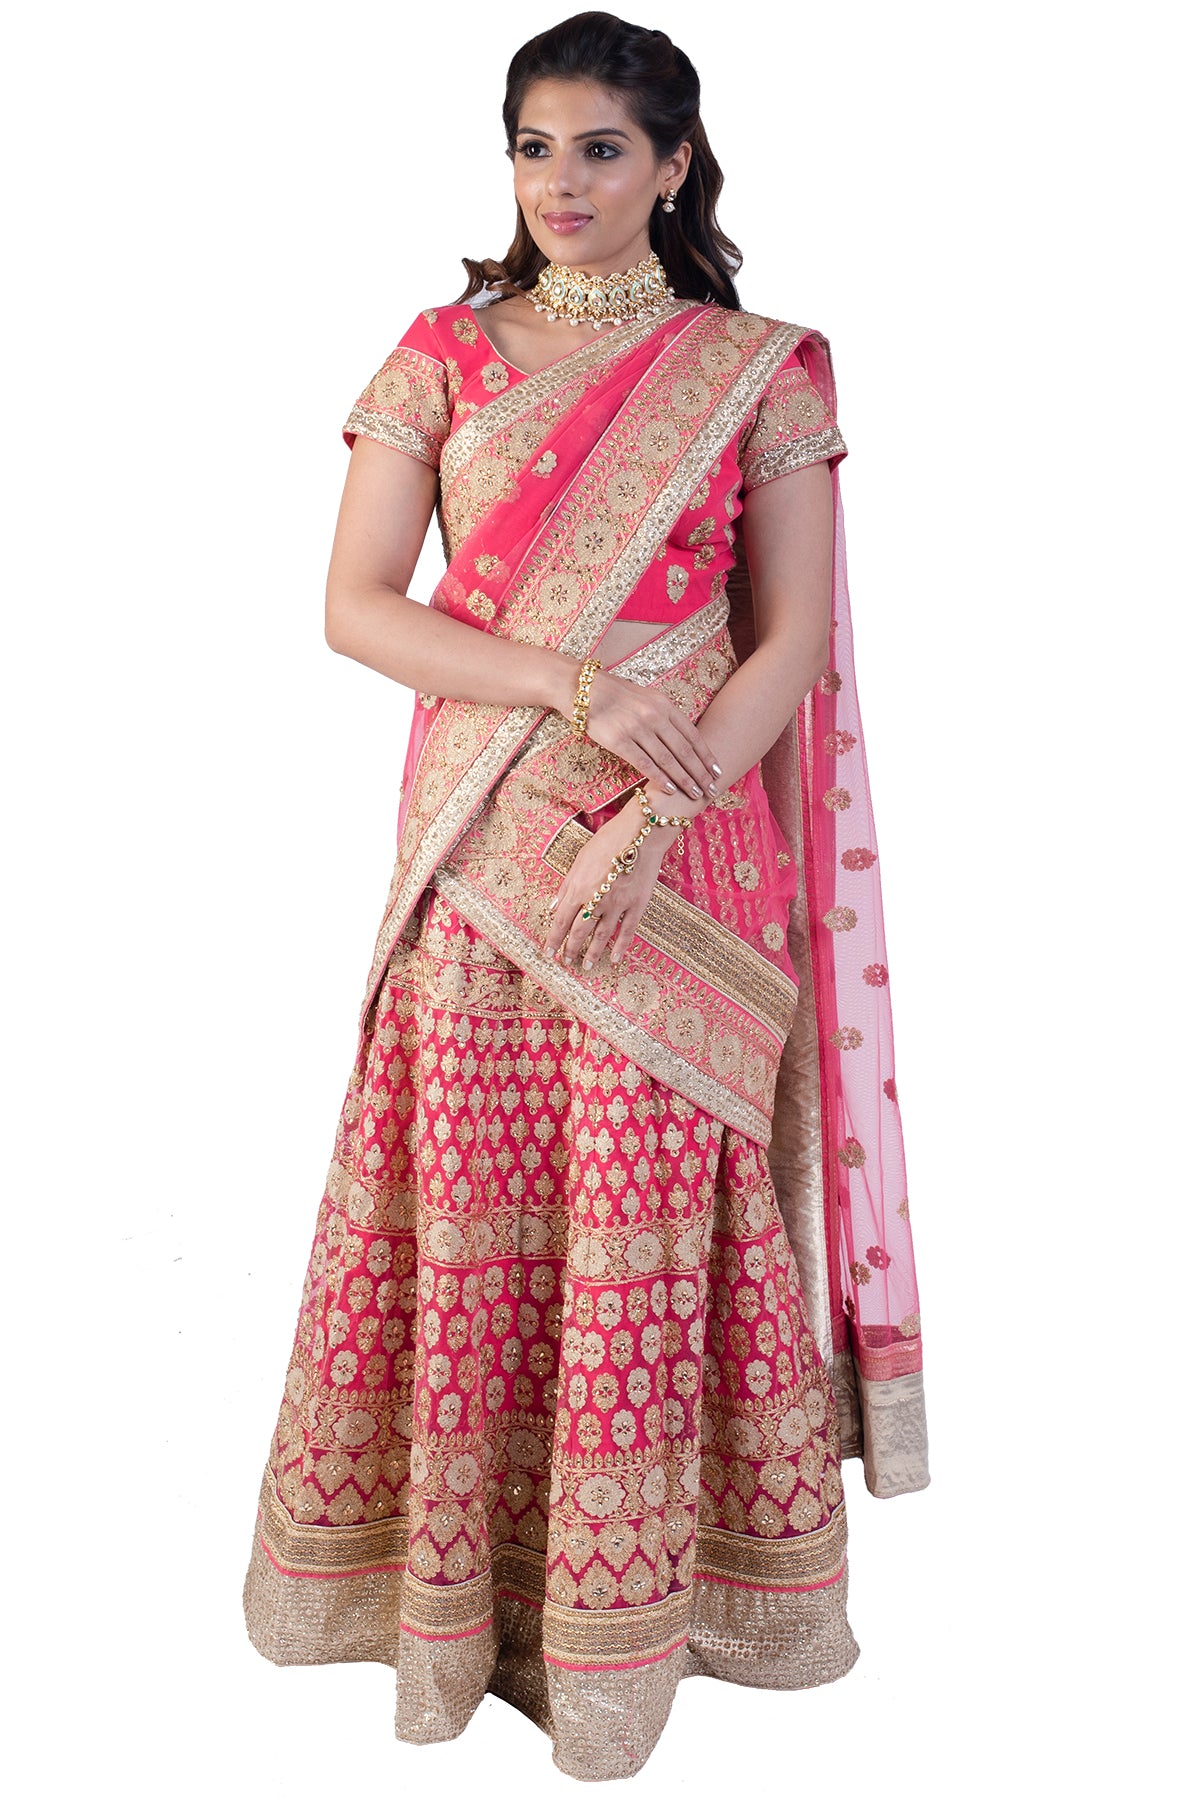 Pretty in pink! The outfit has detailed gold zardosi work on both the lehenga and the blouse. Drape around it a matching dupatta to complete the look.